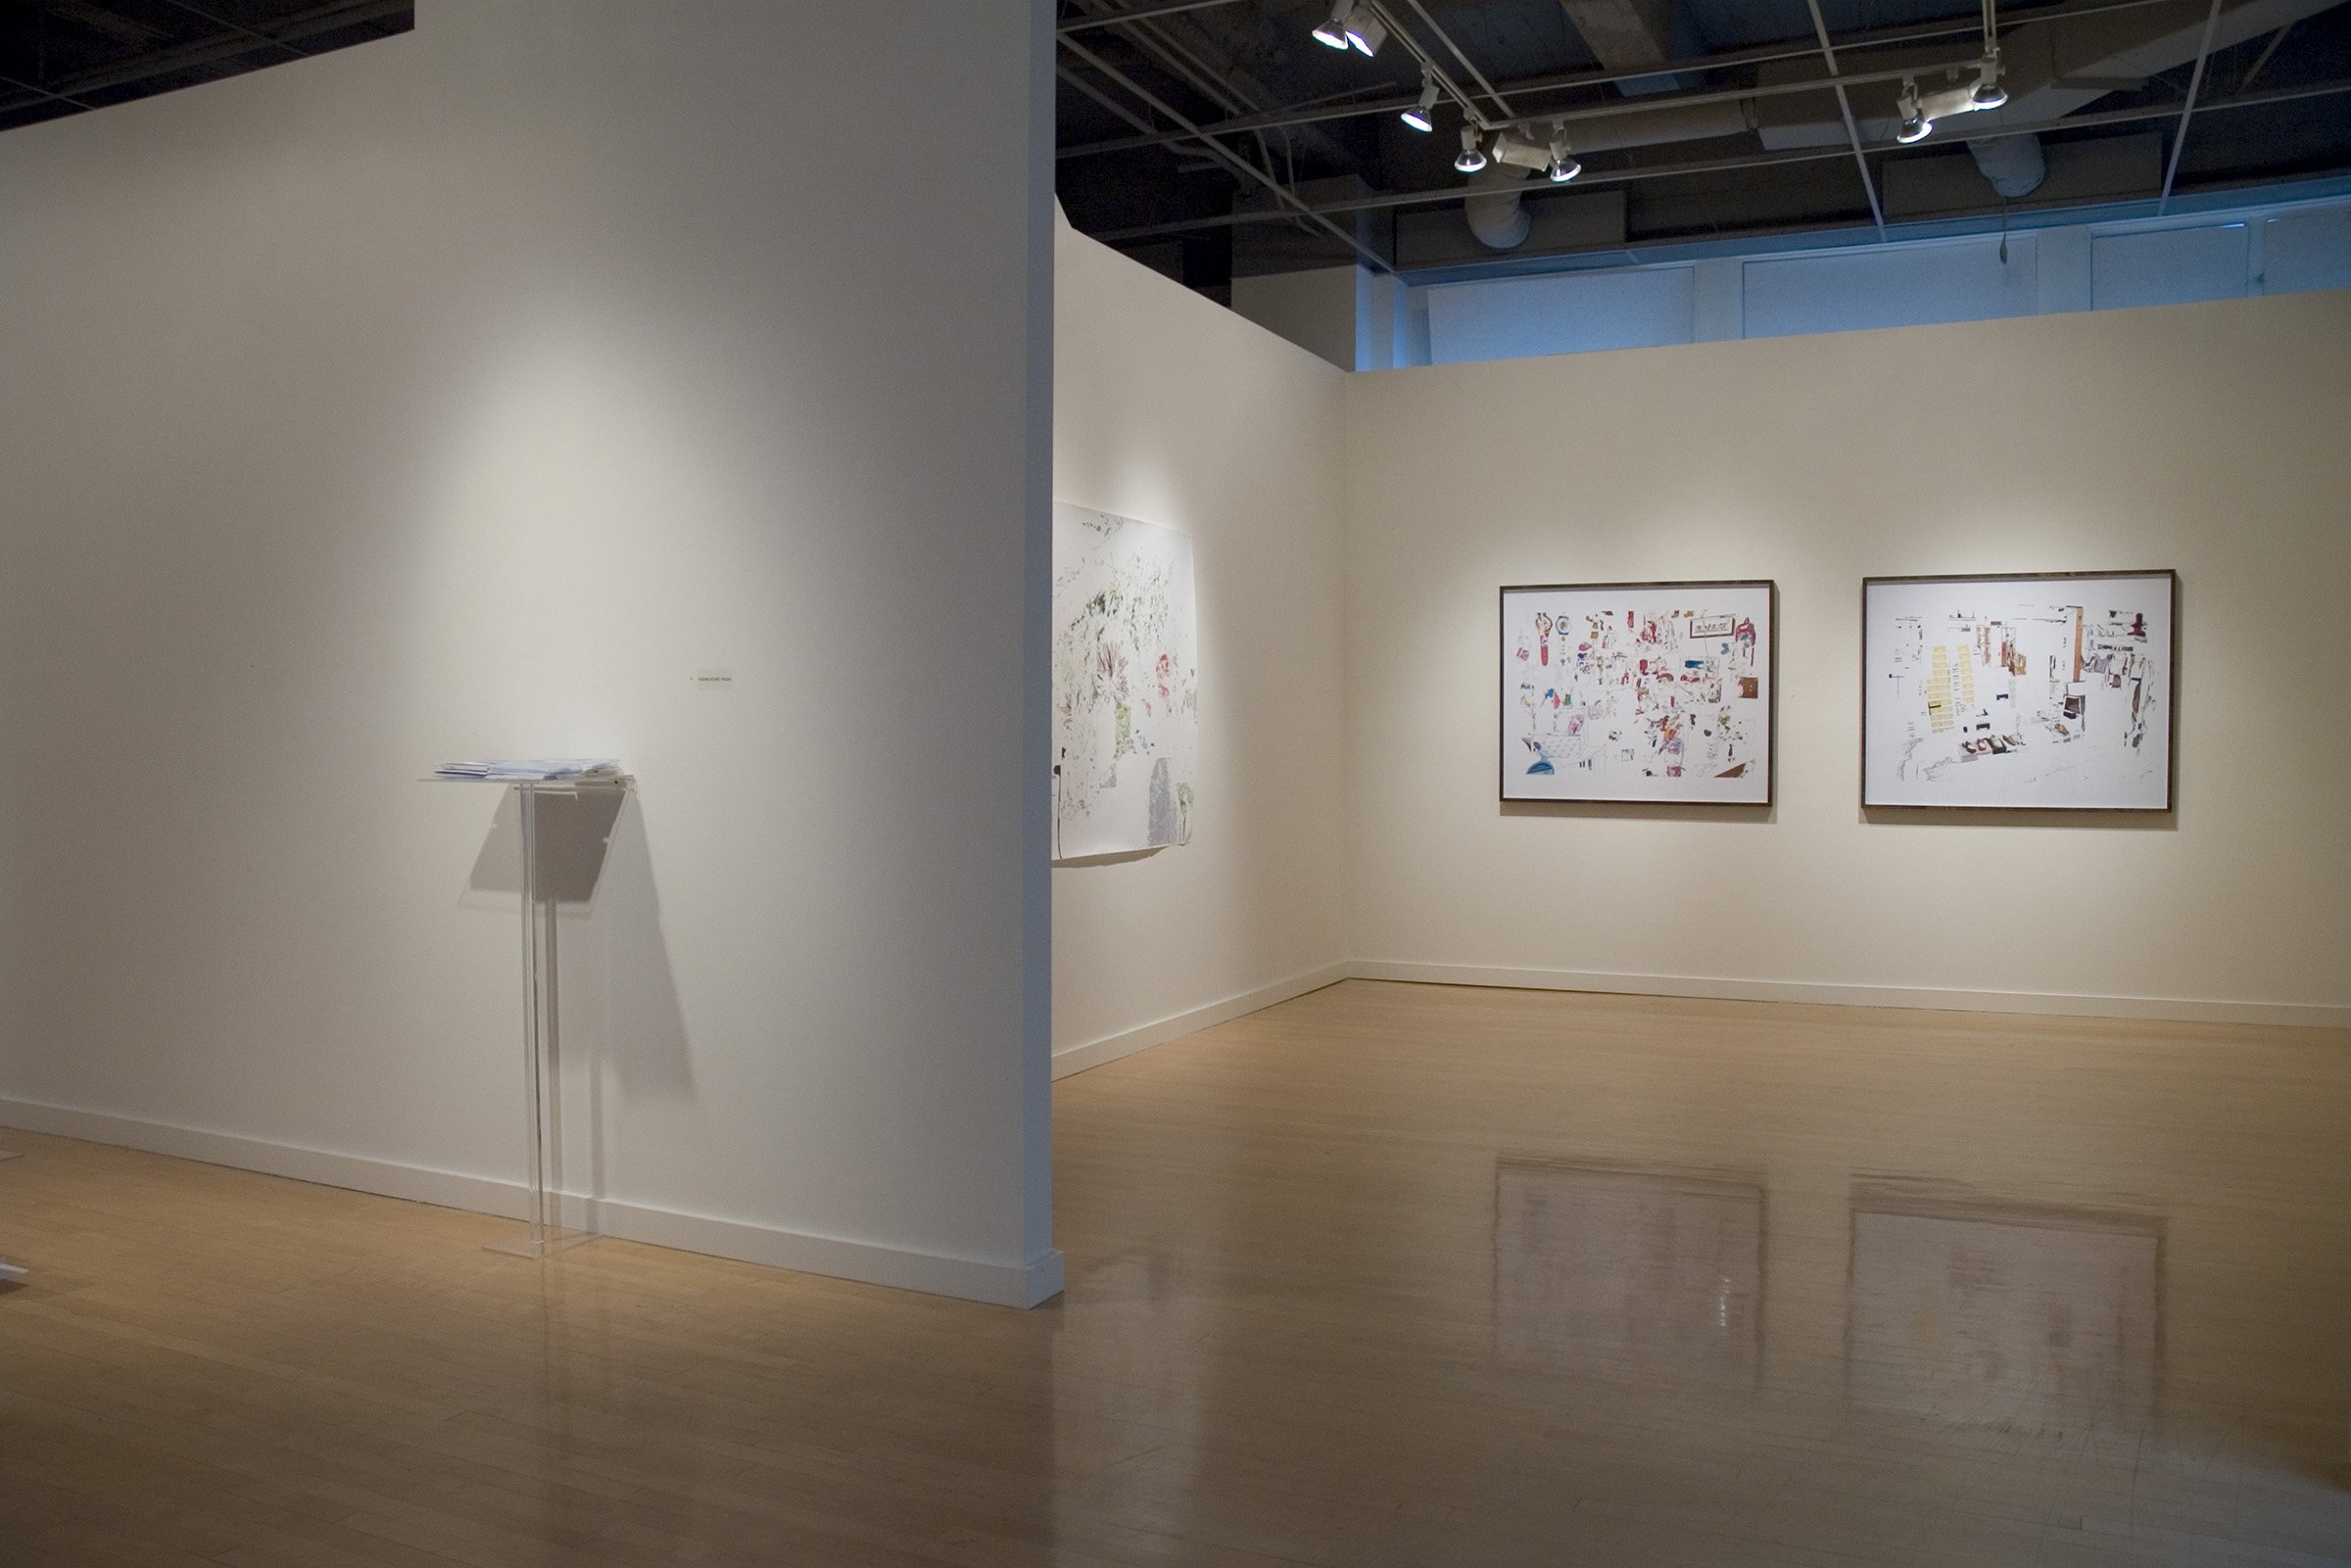   Rebeca Bollinger, drawings and photographs , exhibition view, 2004 